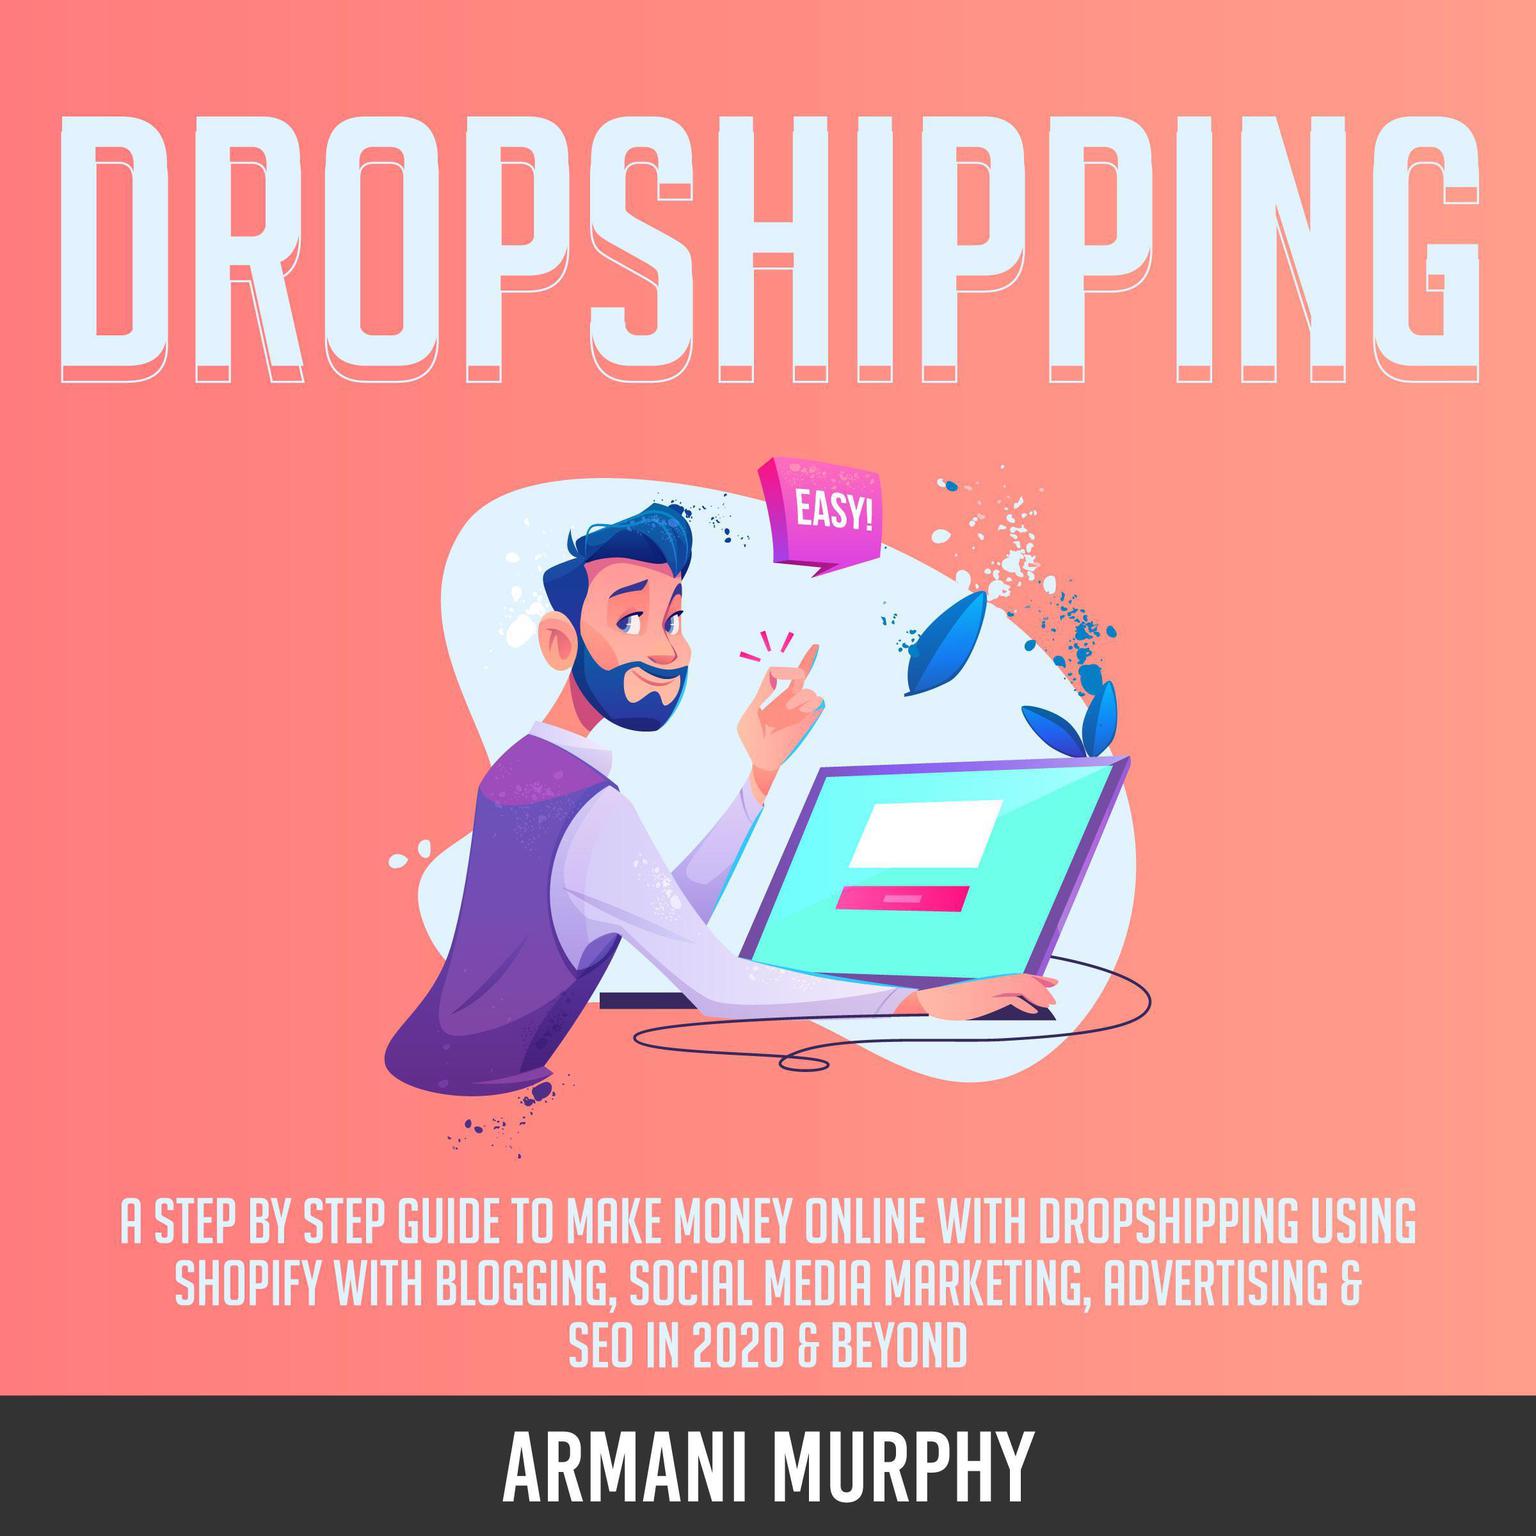 Dropshipping: A Step by Step Guide to Make Money Online With Dropshipping Using Shopify With Blogging, Social Media Marketing, Advertising & SEO in 2020 & Beyond Audiobook, by Armani Murphy